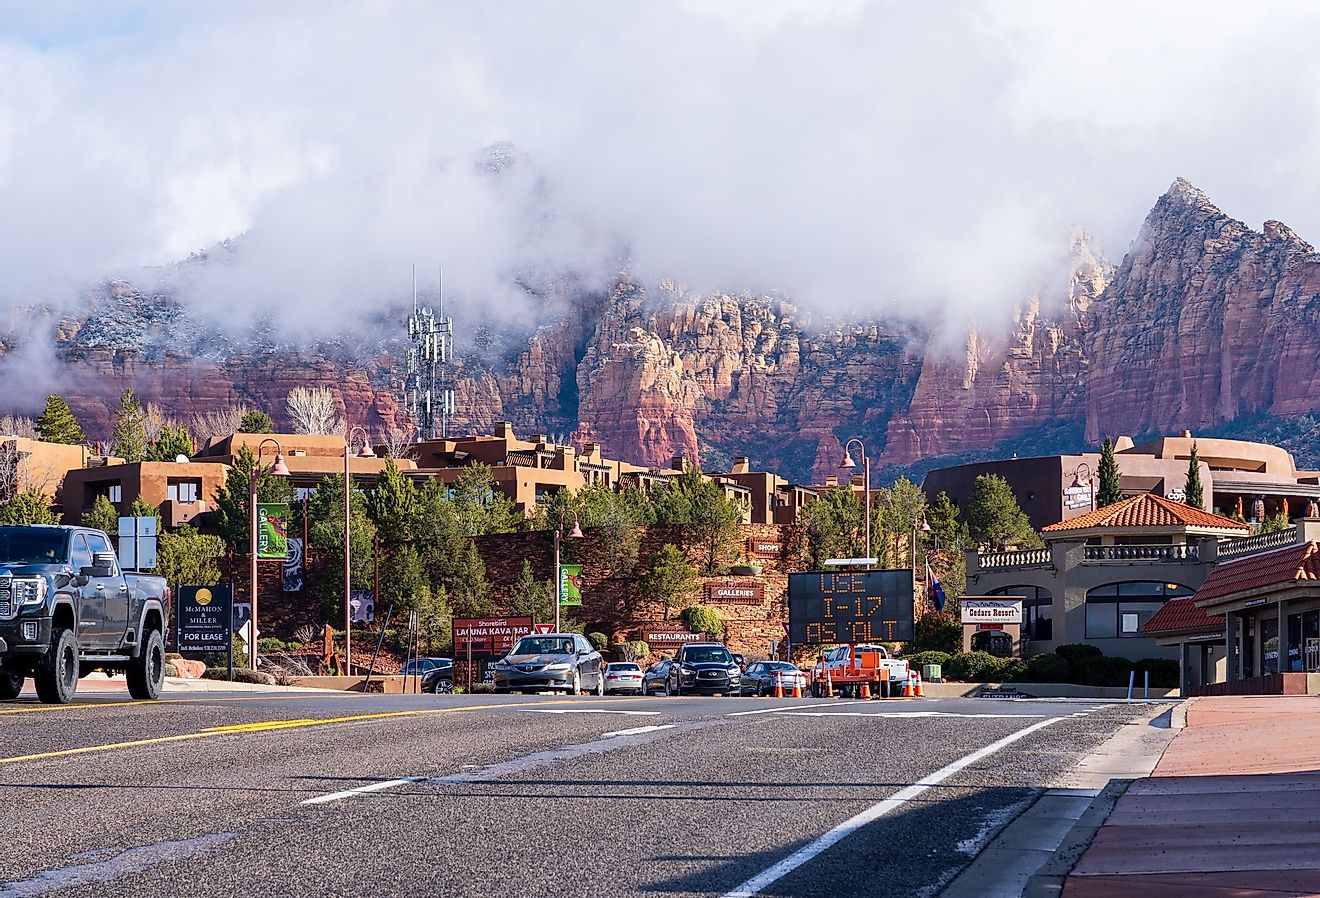 Downtown Sedona with mountains in the background. Image credit Red Lemon via Shutterstock.